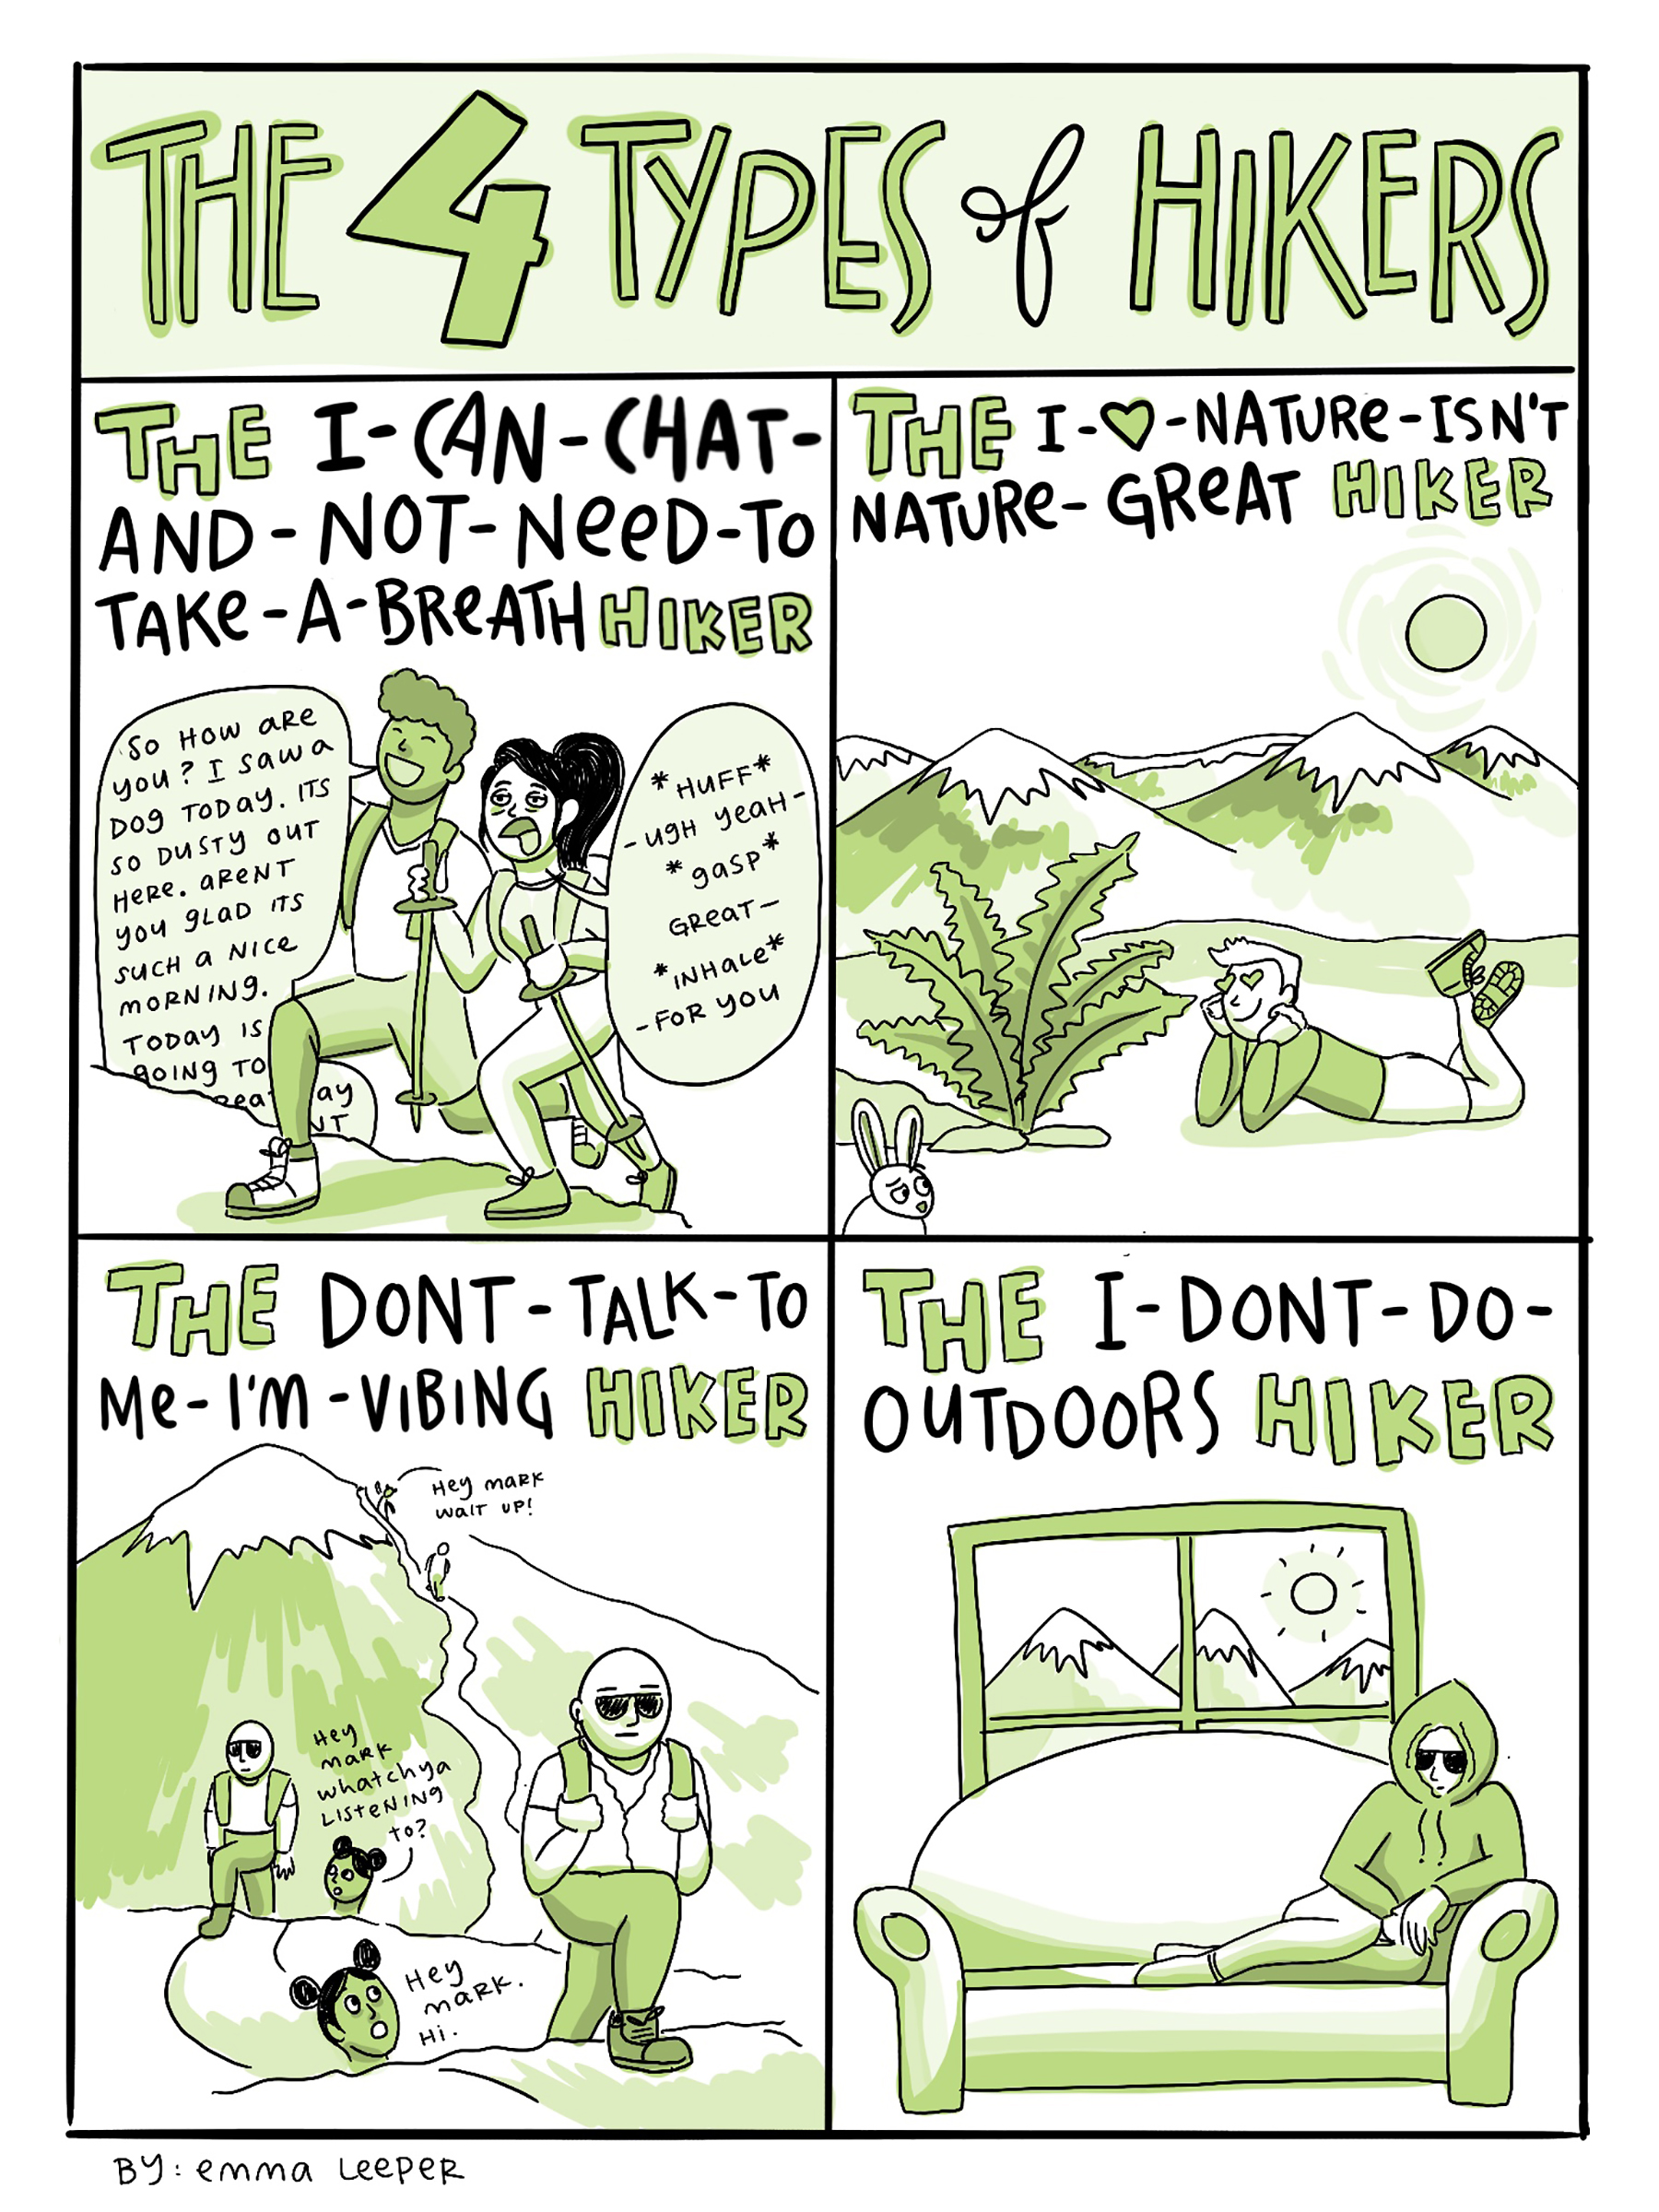 4 Types of Hikers digital comic by Emma Leeper. Published in Souvenirs Travel Magazine, Spring 2021.